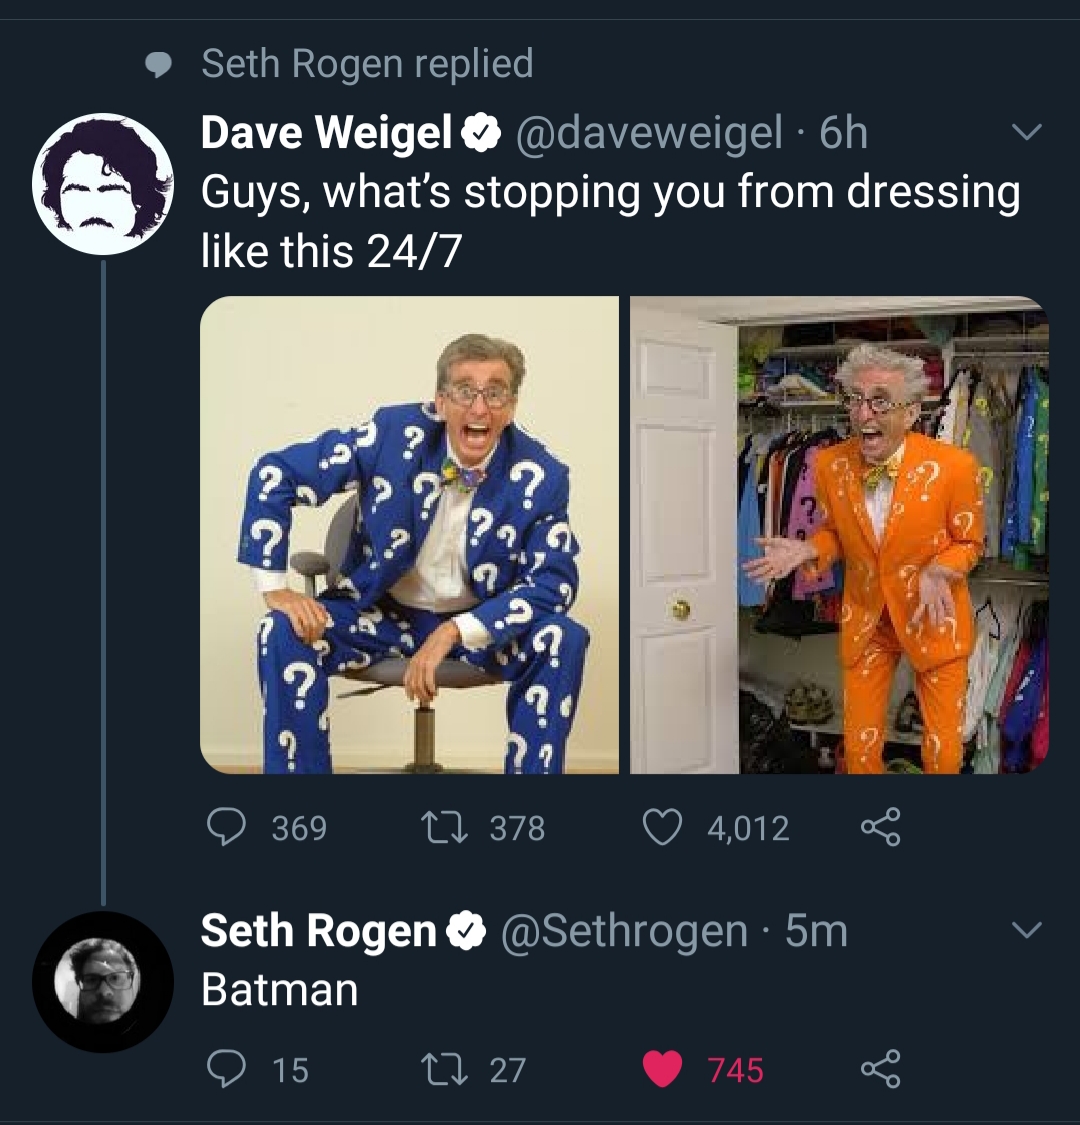 media - Seth Rogen replied Dave Weigel . 6h Guys, what's stopping you from dressing this 247 2 ? ? 369 17 378 4,012 Seth Rogen . 5m Batman 15 12 27 745